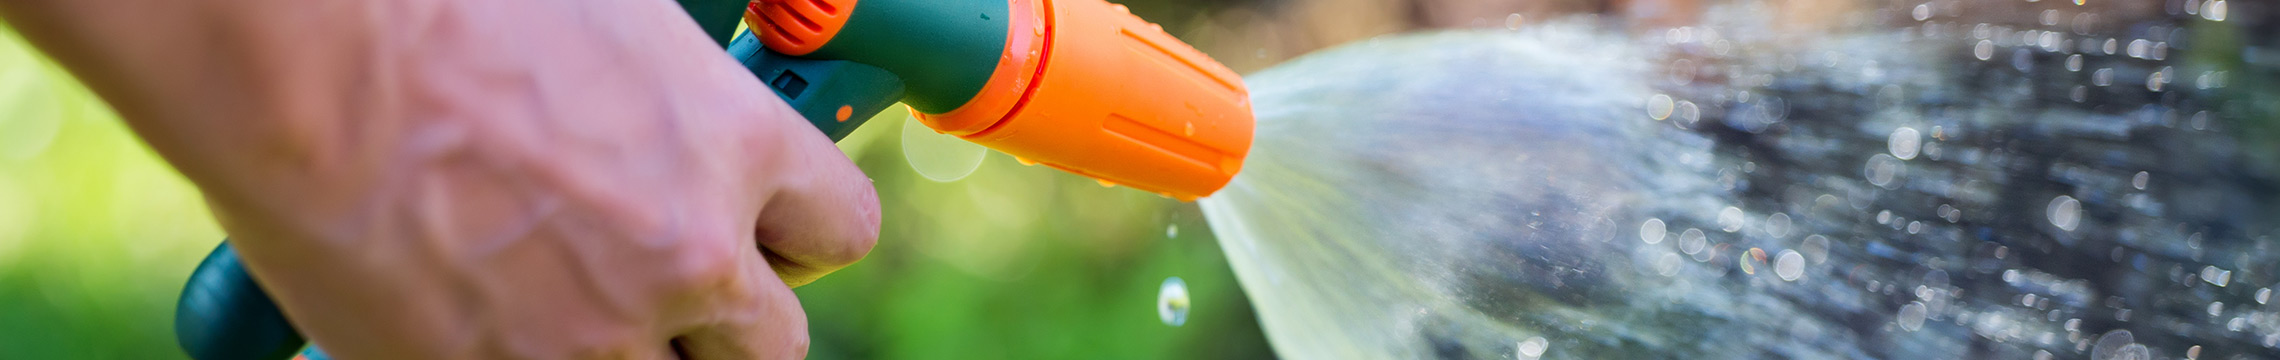 Water spraying from an orange and green hose sprayer spout